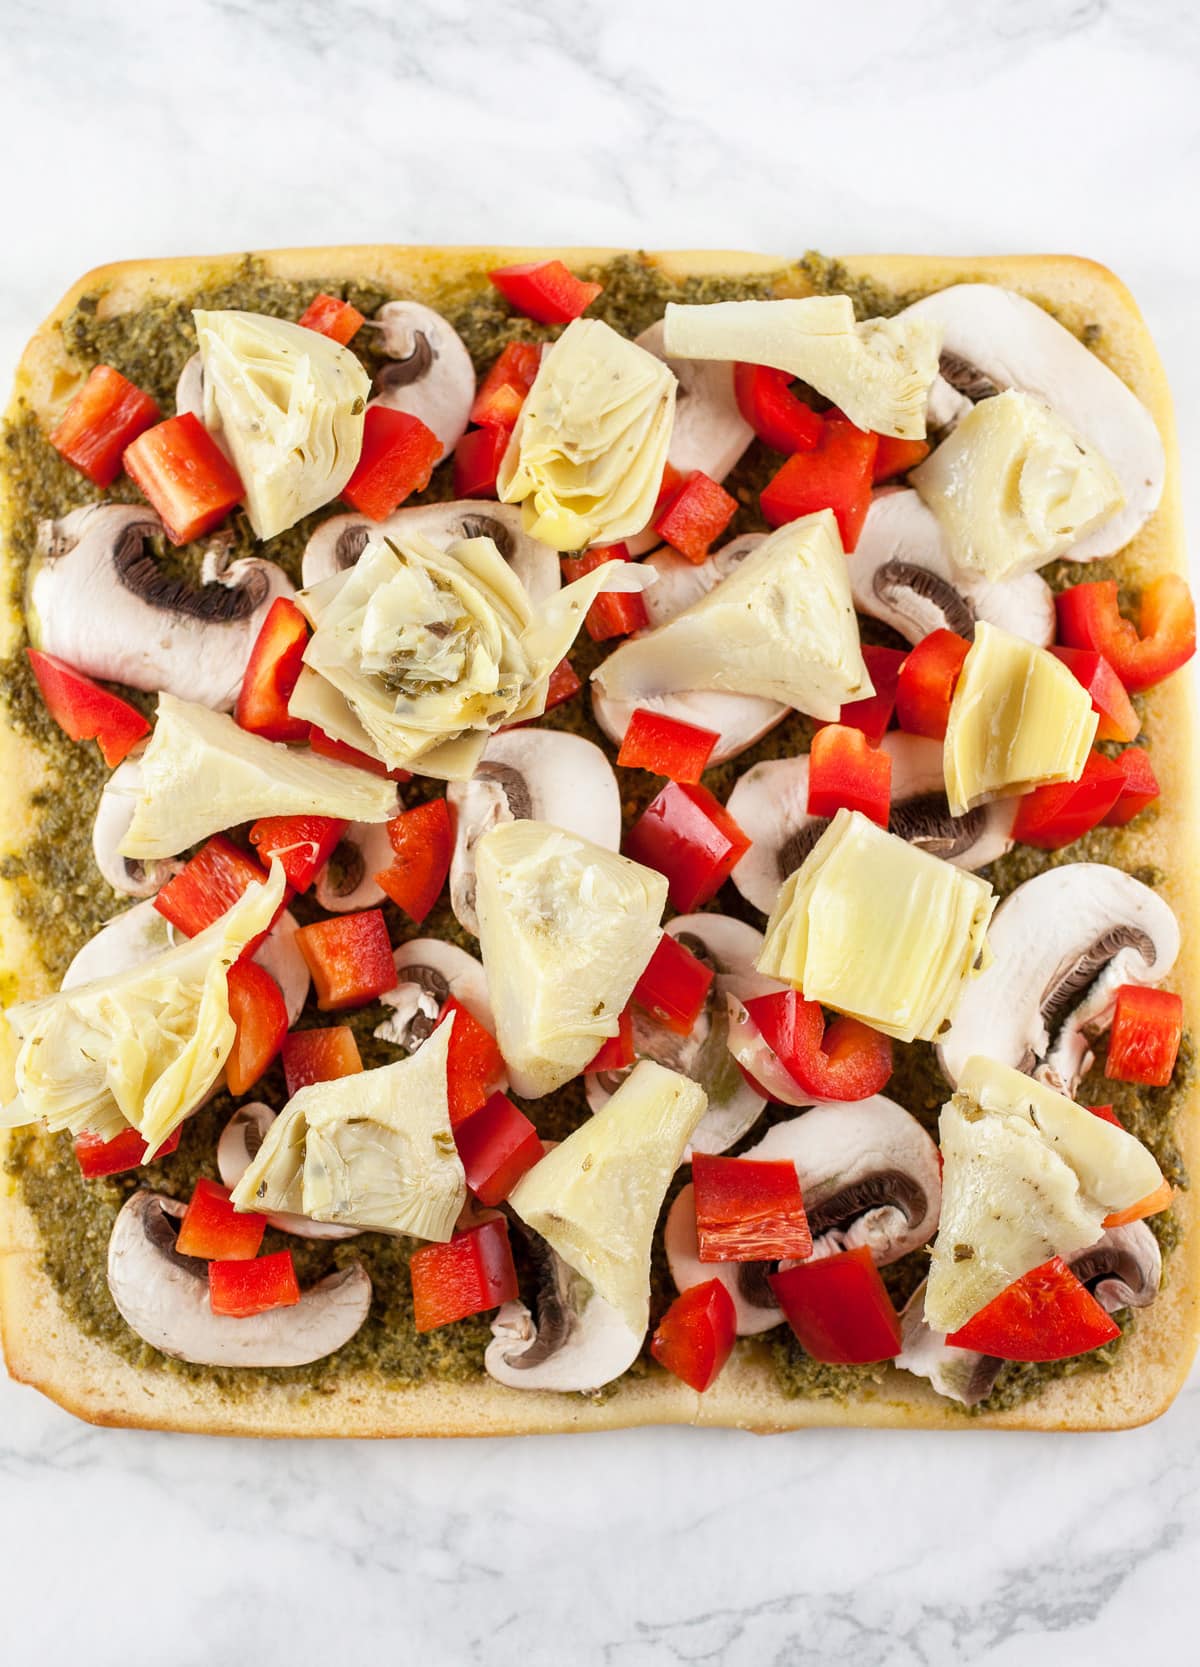 Pesto, red bell peppers, mushrooms, and artichokes on uncooked flatbread.